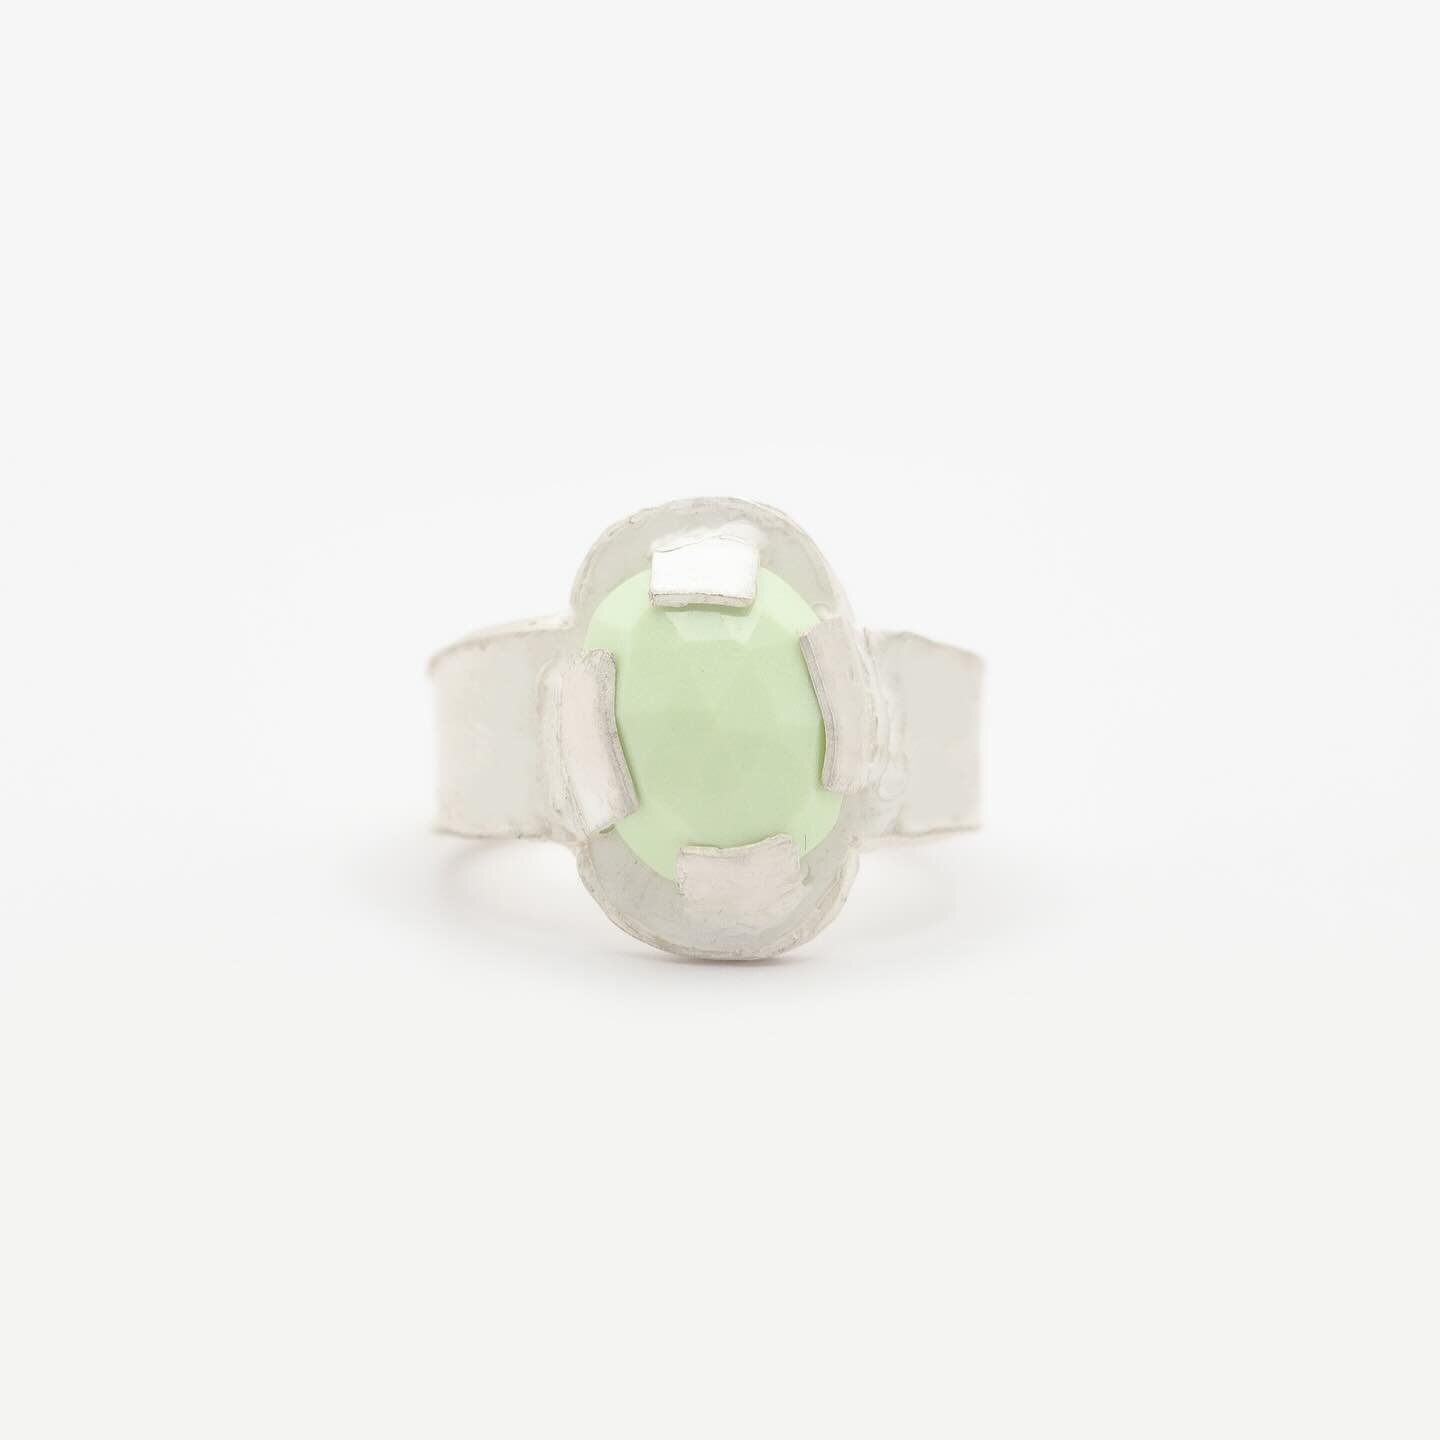 A #classicnotclassic silver solitaire by @stefanieverhoef with a lemon chrysoprase. 
.
.
.
#venice #ohmybluegallery #uniquering #offshootring #jewelrygallery #contemporaryjewelry #arttowear #futureheirloom #jewelrydesigner #contemporaryjewellery #Gio